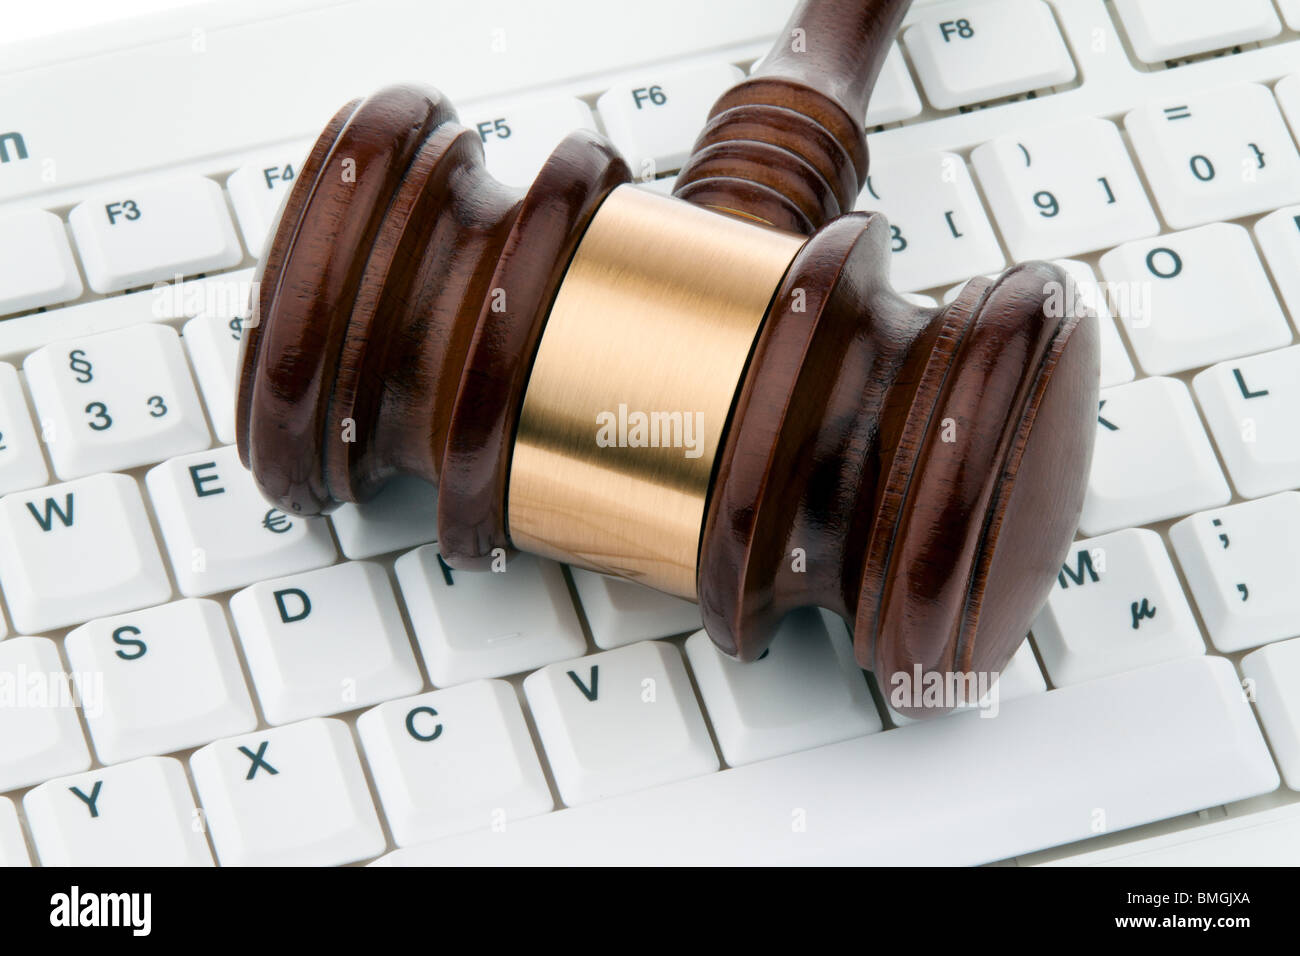 Judge hammer and keyboard. Legal certainty on the Internet. Internet auctions Stock Photo